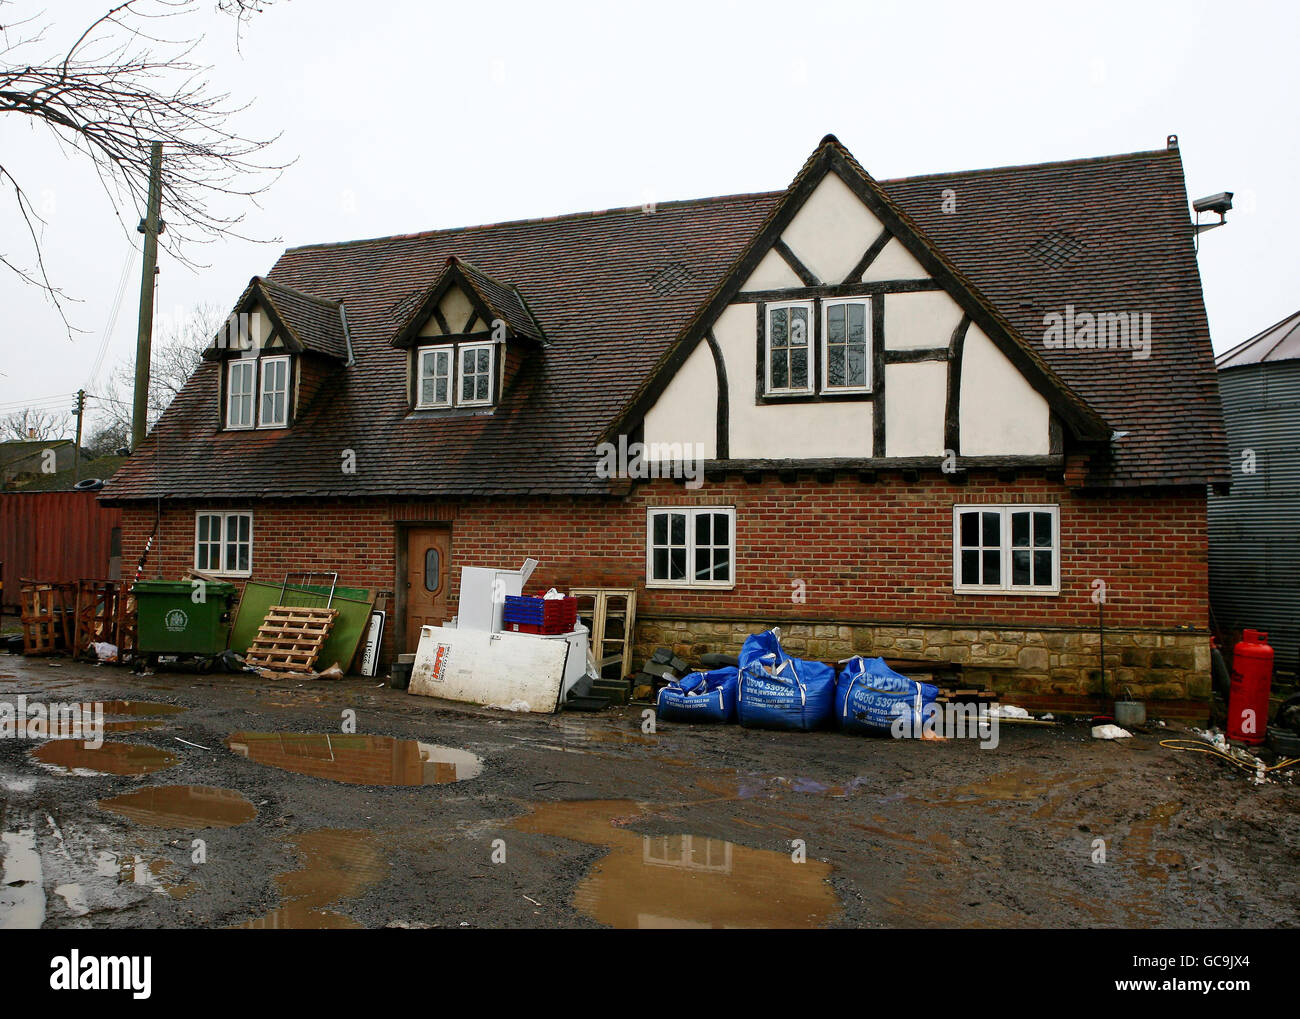 A general view of the house built by Robert Fidler in Salfords near Redhill, Surrey, where he intended to live before building another home which may have to be demolished after a High Court ruling today. Stock Photo